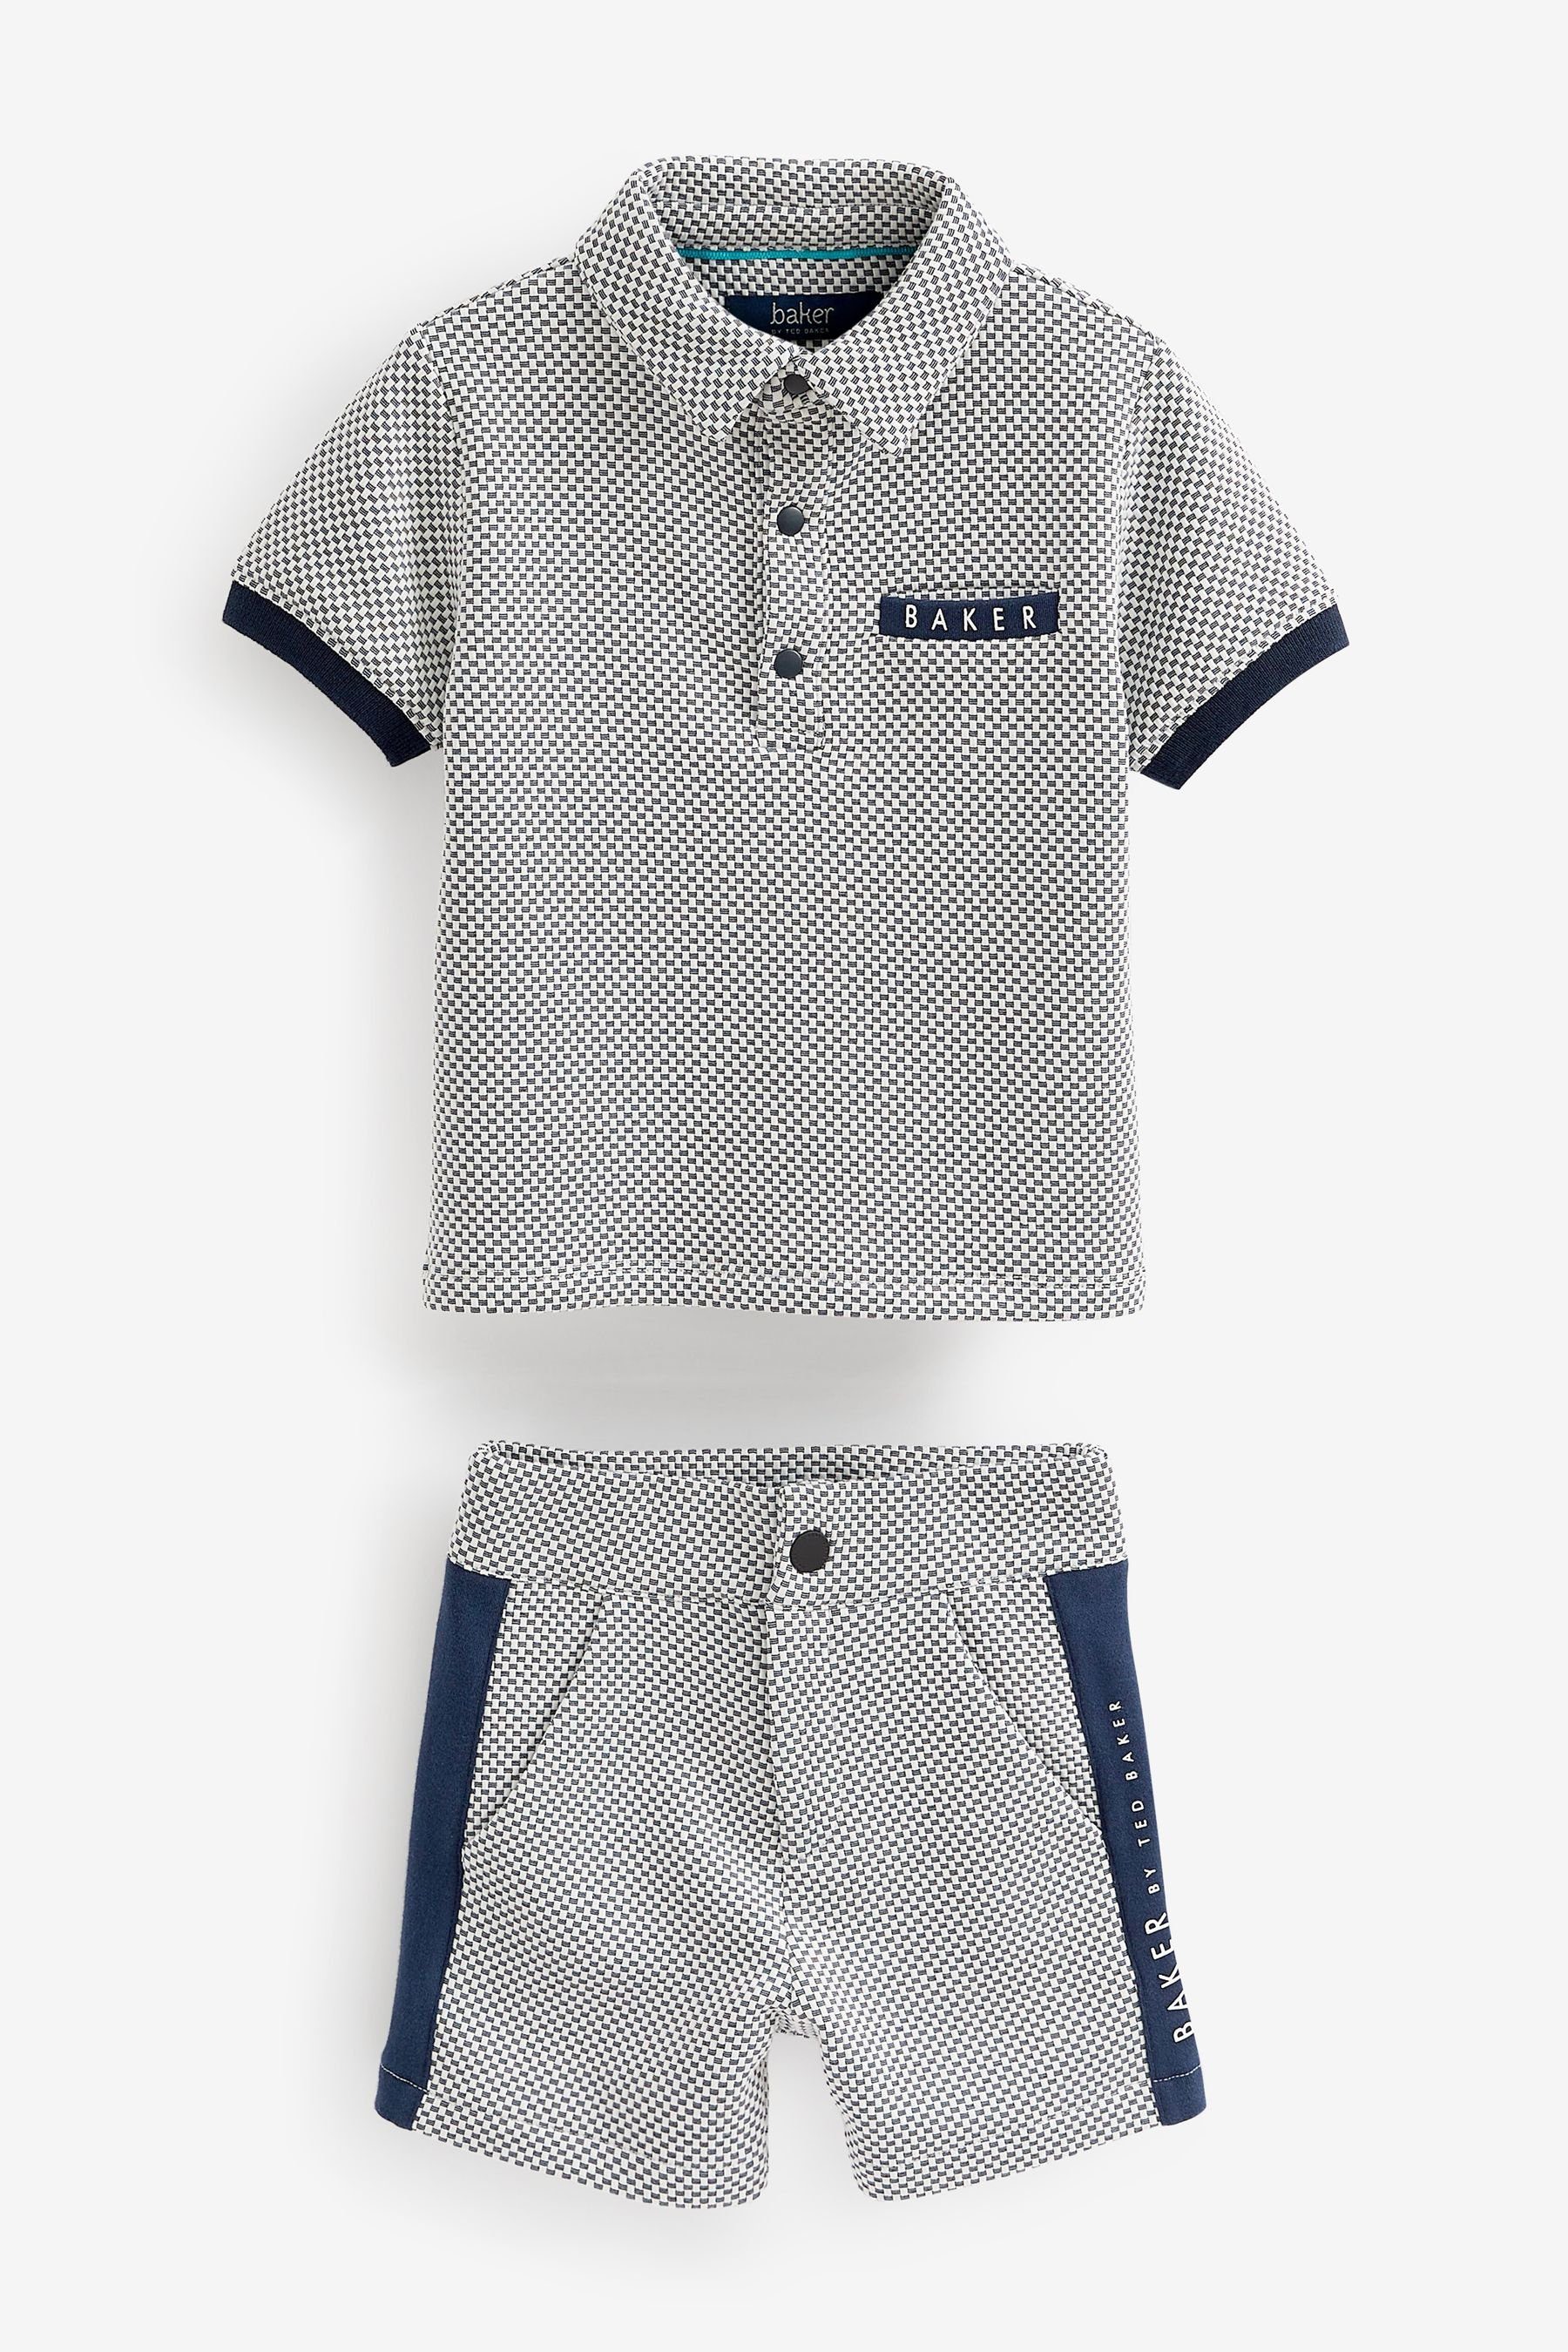 Baker by Ted Baker Shirt & Shorts Baker by Ted Baker Set mit Poloshirt und Shorts (2-tlg) Navy